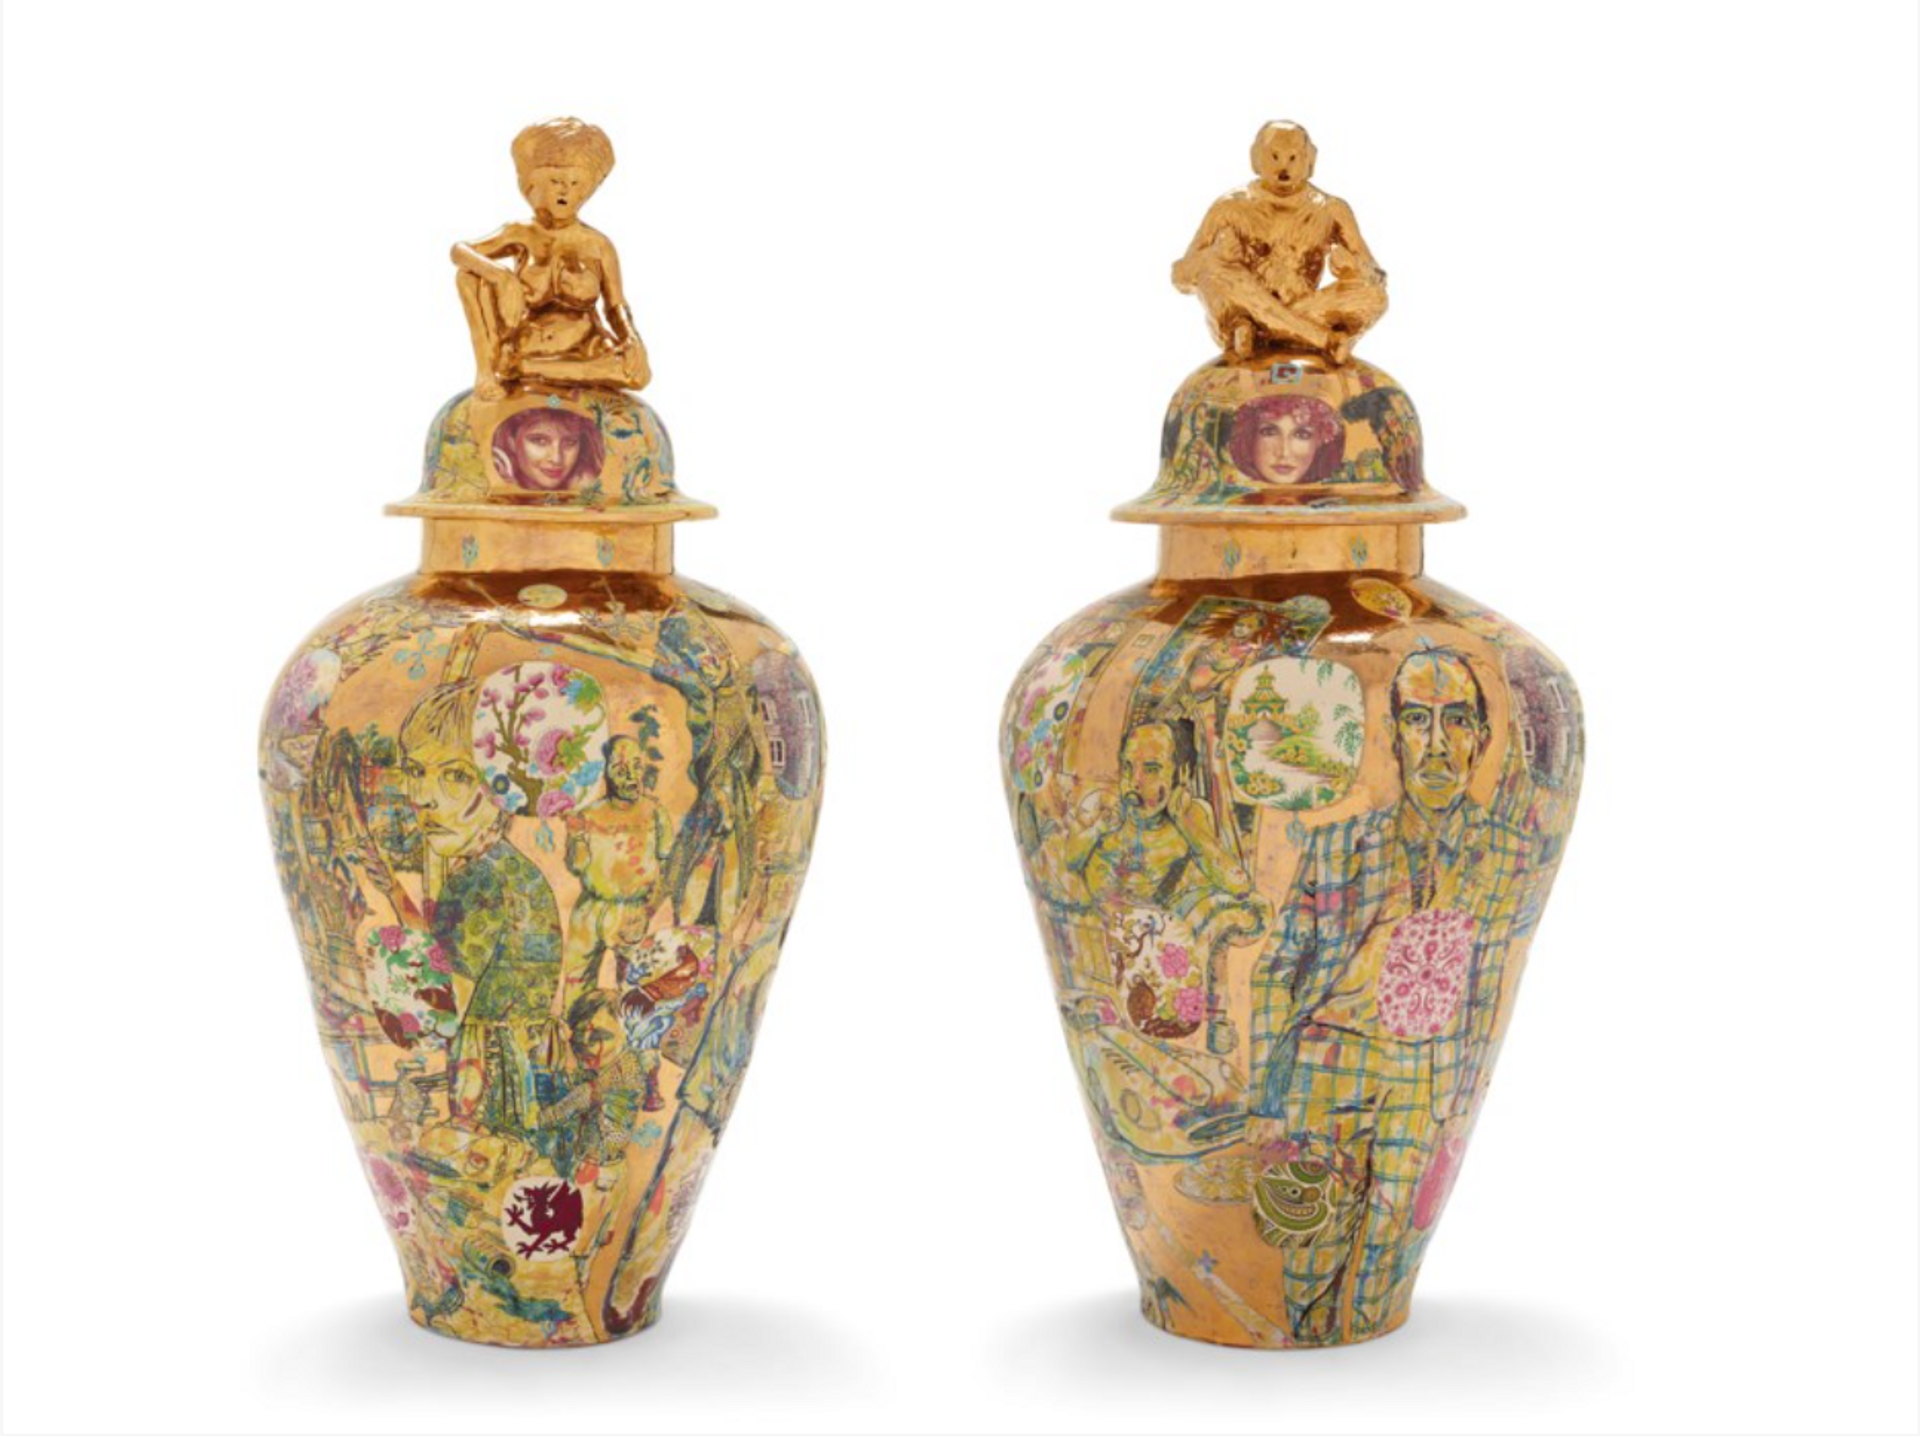 Pair of gold vases by Grayson Perry, with one depicting his mother and the other depicting his step-father. 